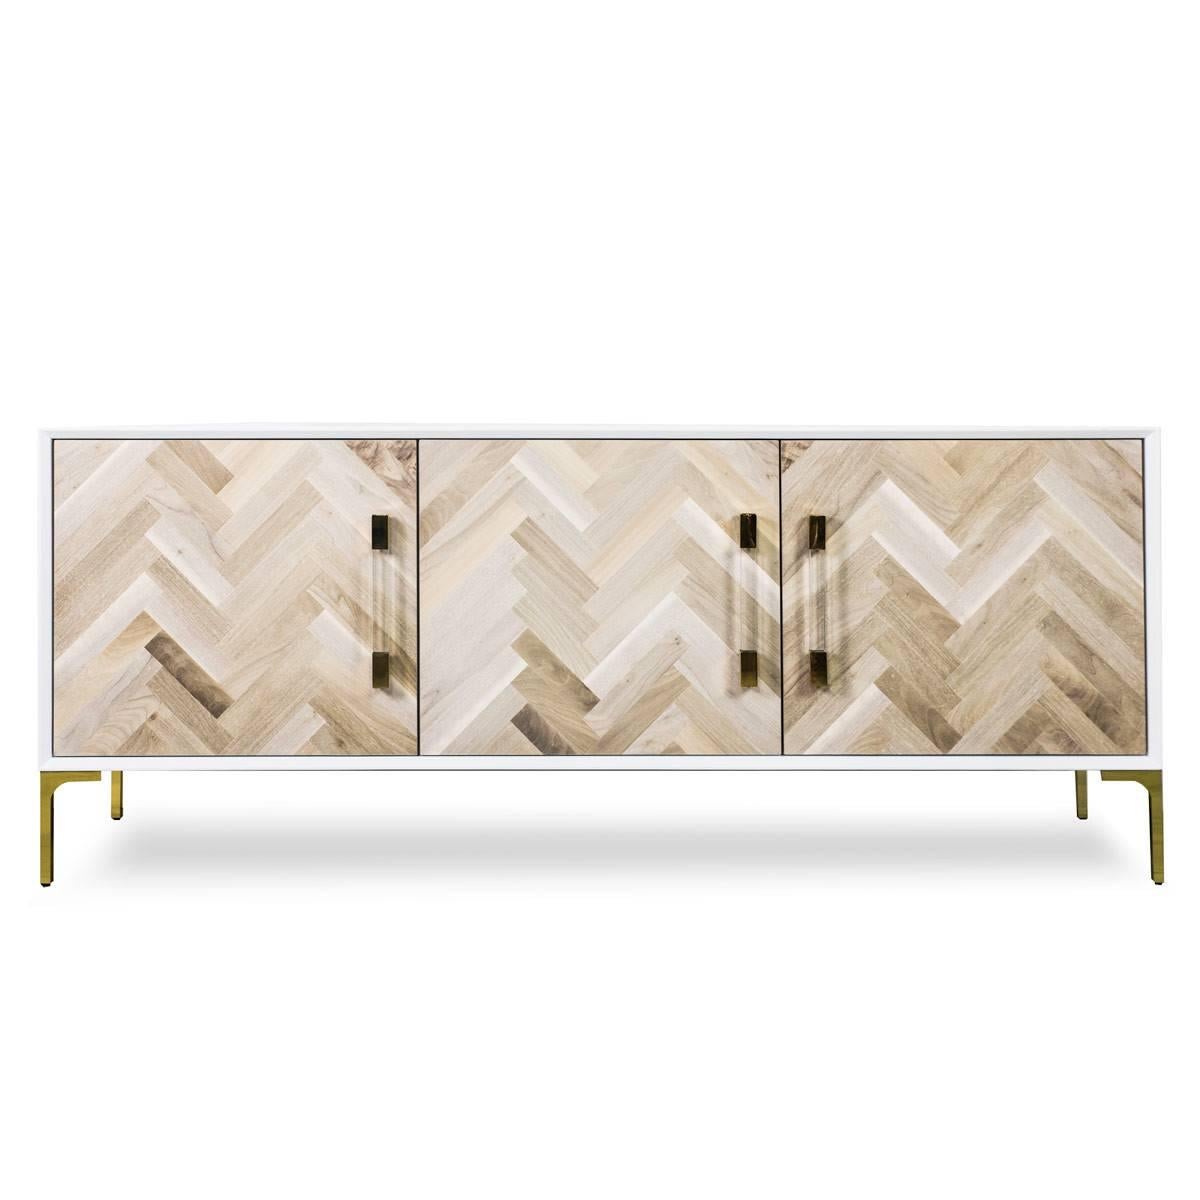 The Amalfi 3 door credenza is perfect for any spaces, with North American Bleached or South American Oiled Walnut finished doors. Surrounded by a matte white finish, the wood pieces placed on the doors create a large herringbone effect. The doors